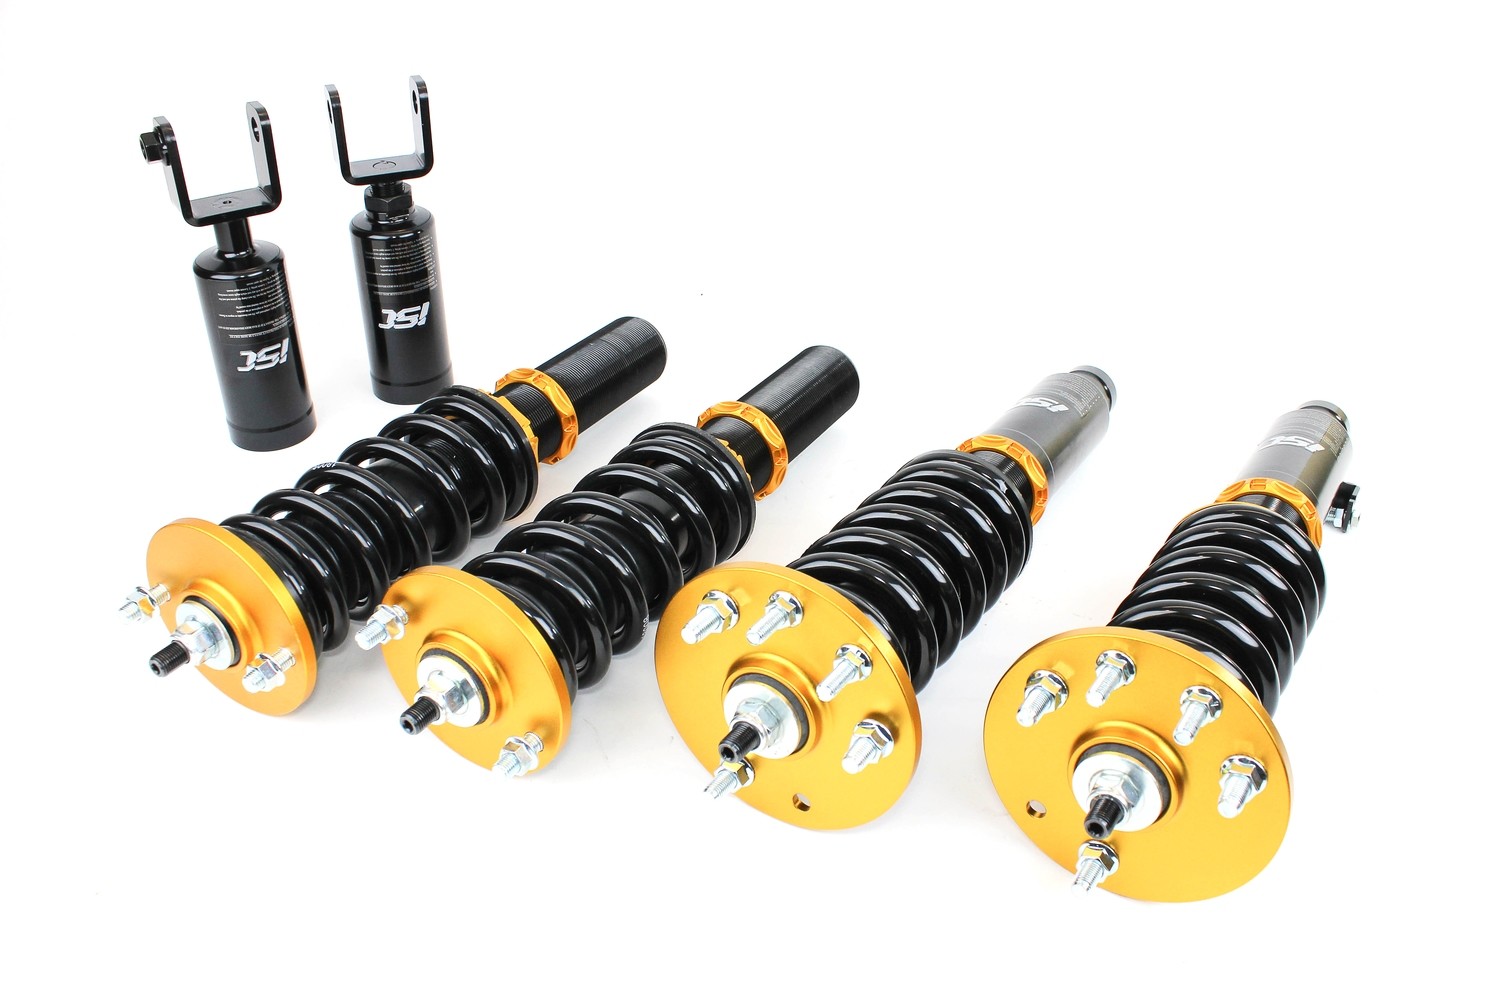 CLEARANCE Acura TL Gen2 (99-03) ISC N1 Coilover Suspension - Street Sport Valving Clearance